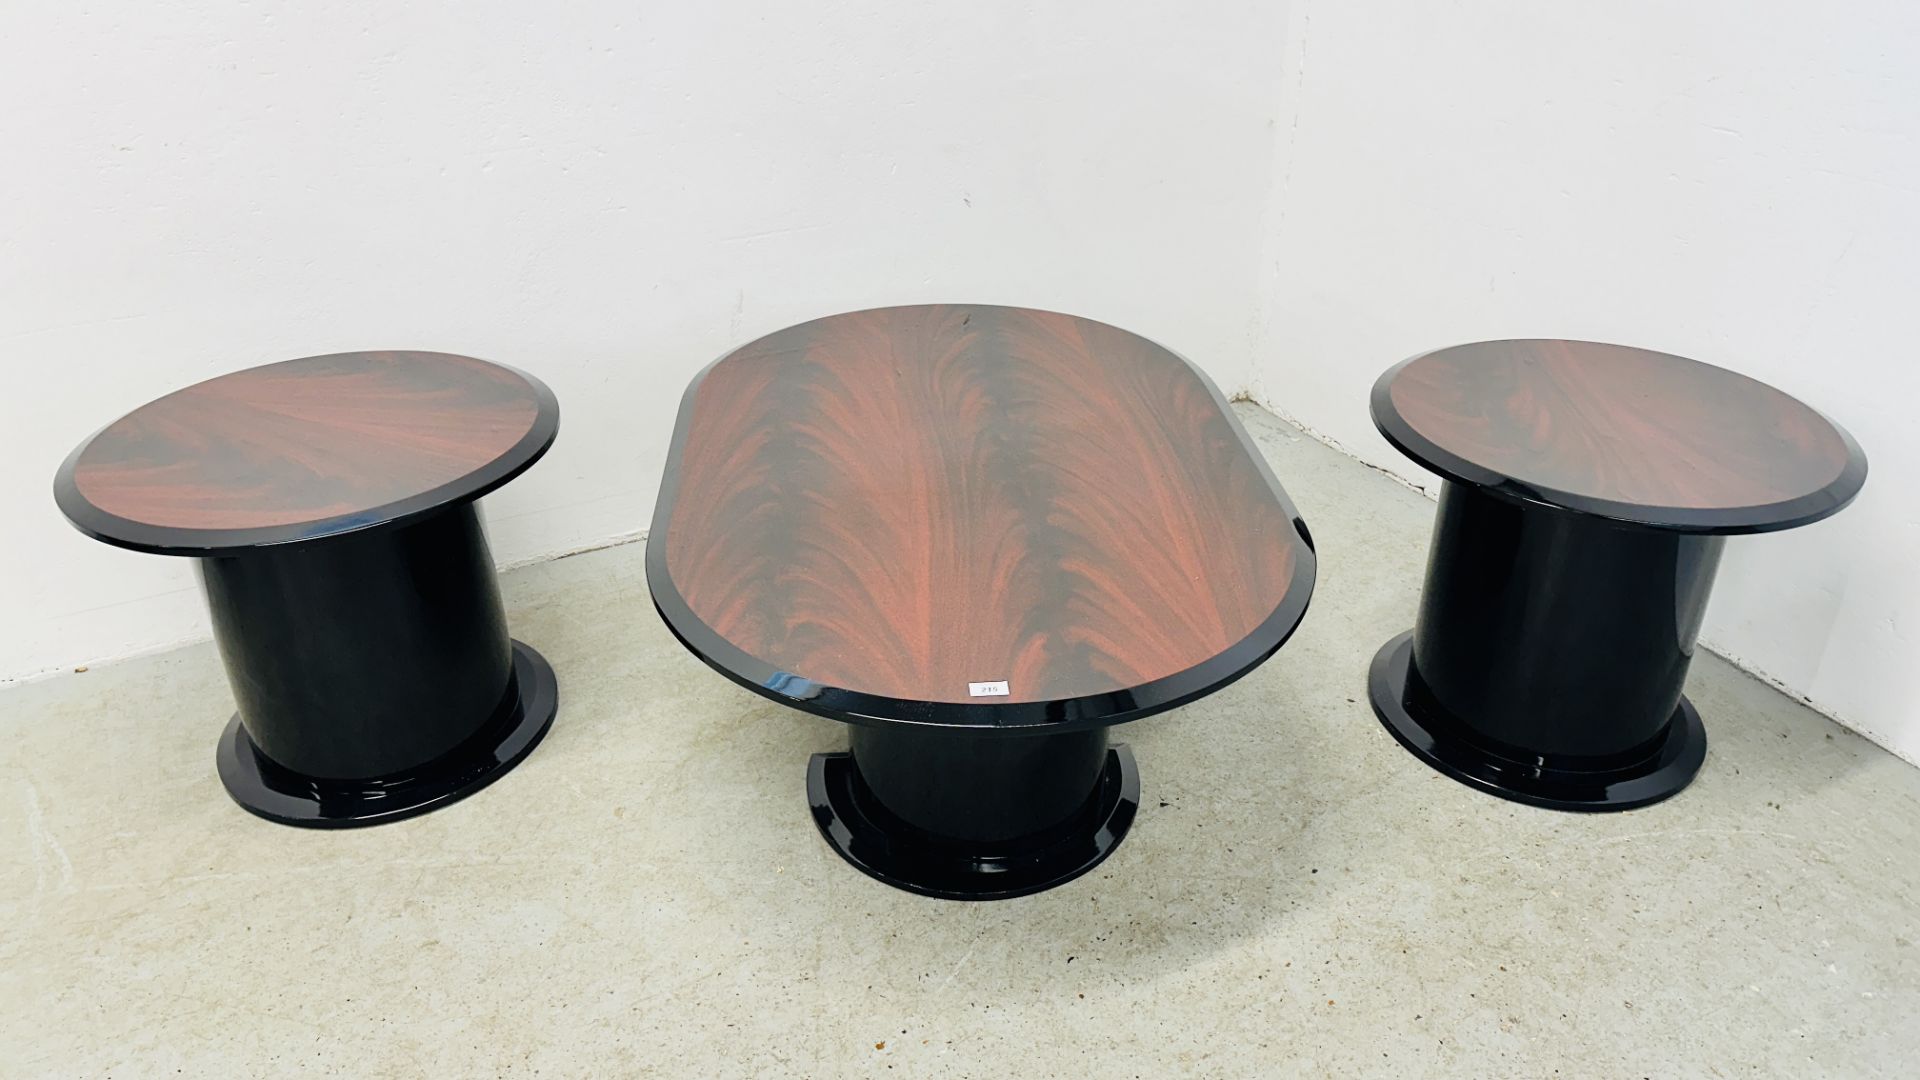 3 MATCHING DESIGN HIGH GLOSS MAHOGANY FINISH COFFEE TABLES INCLUDING A PAIR OF CIRCULAR AND 1 OVAL.